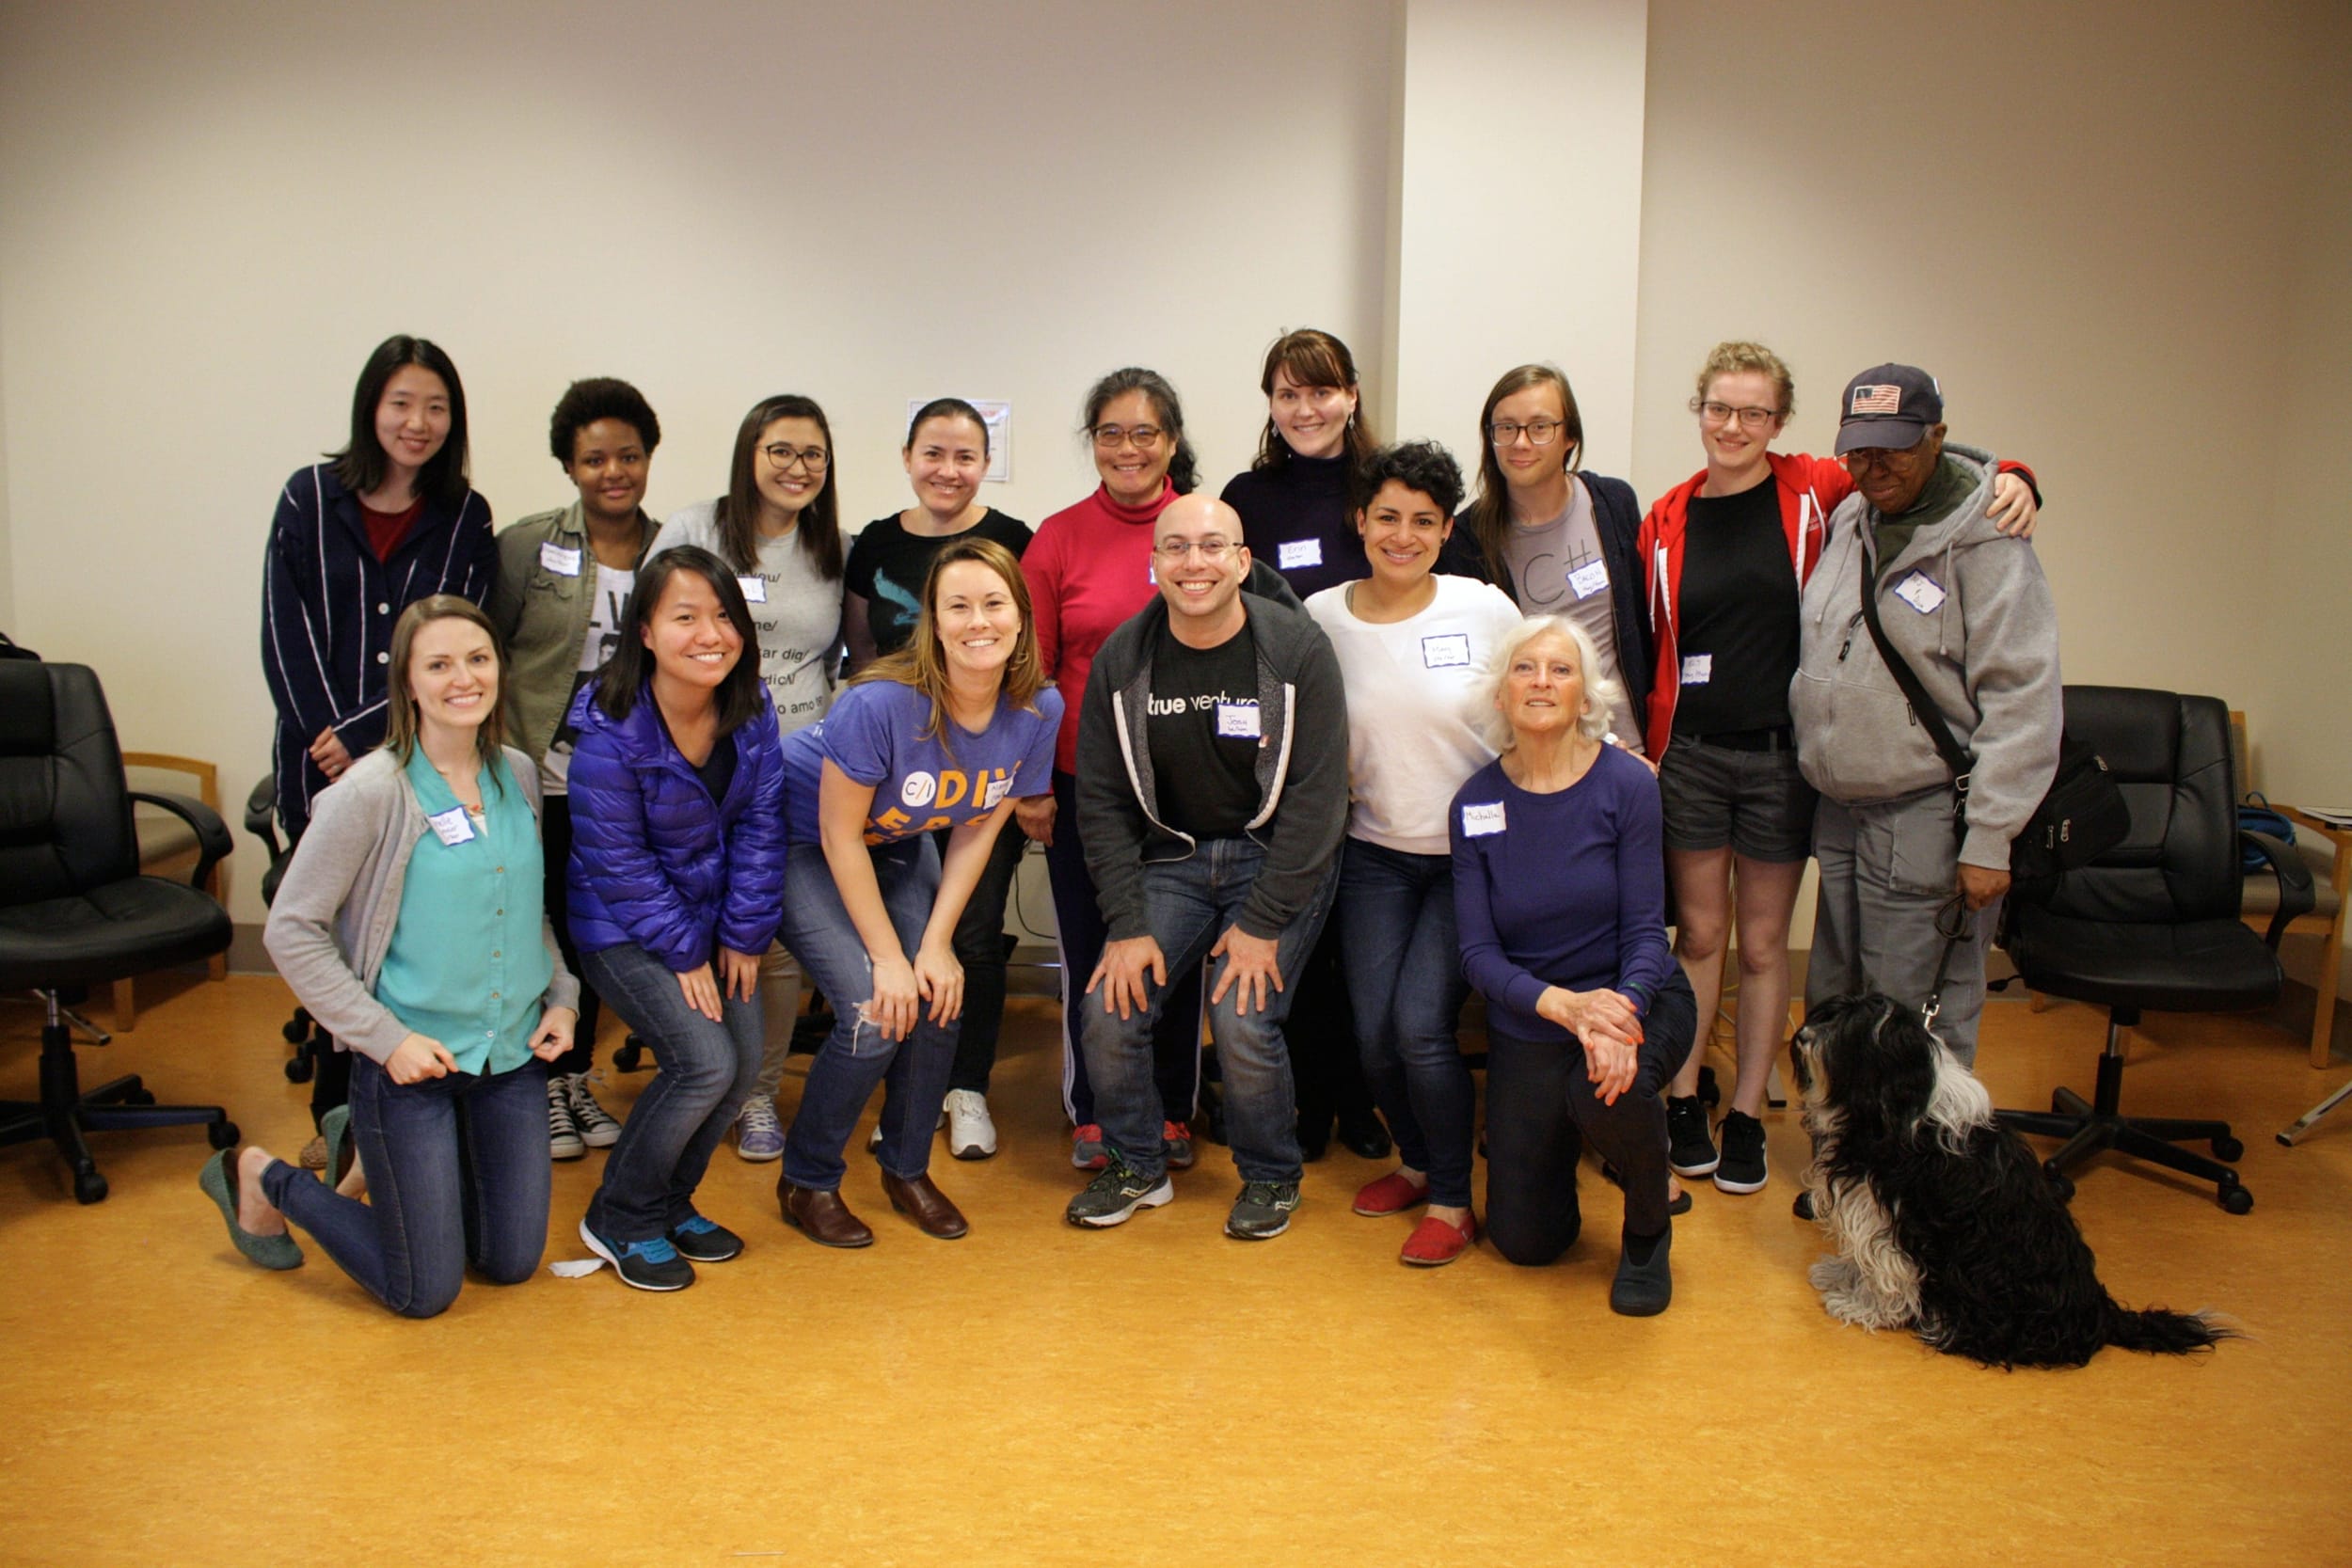 Fifteen participants, mostly women, gathered after a workshop.